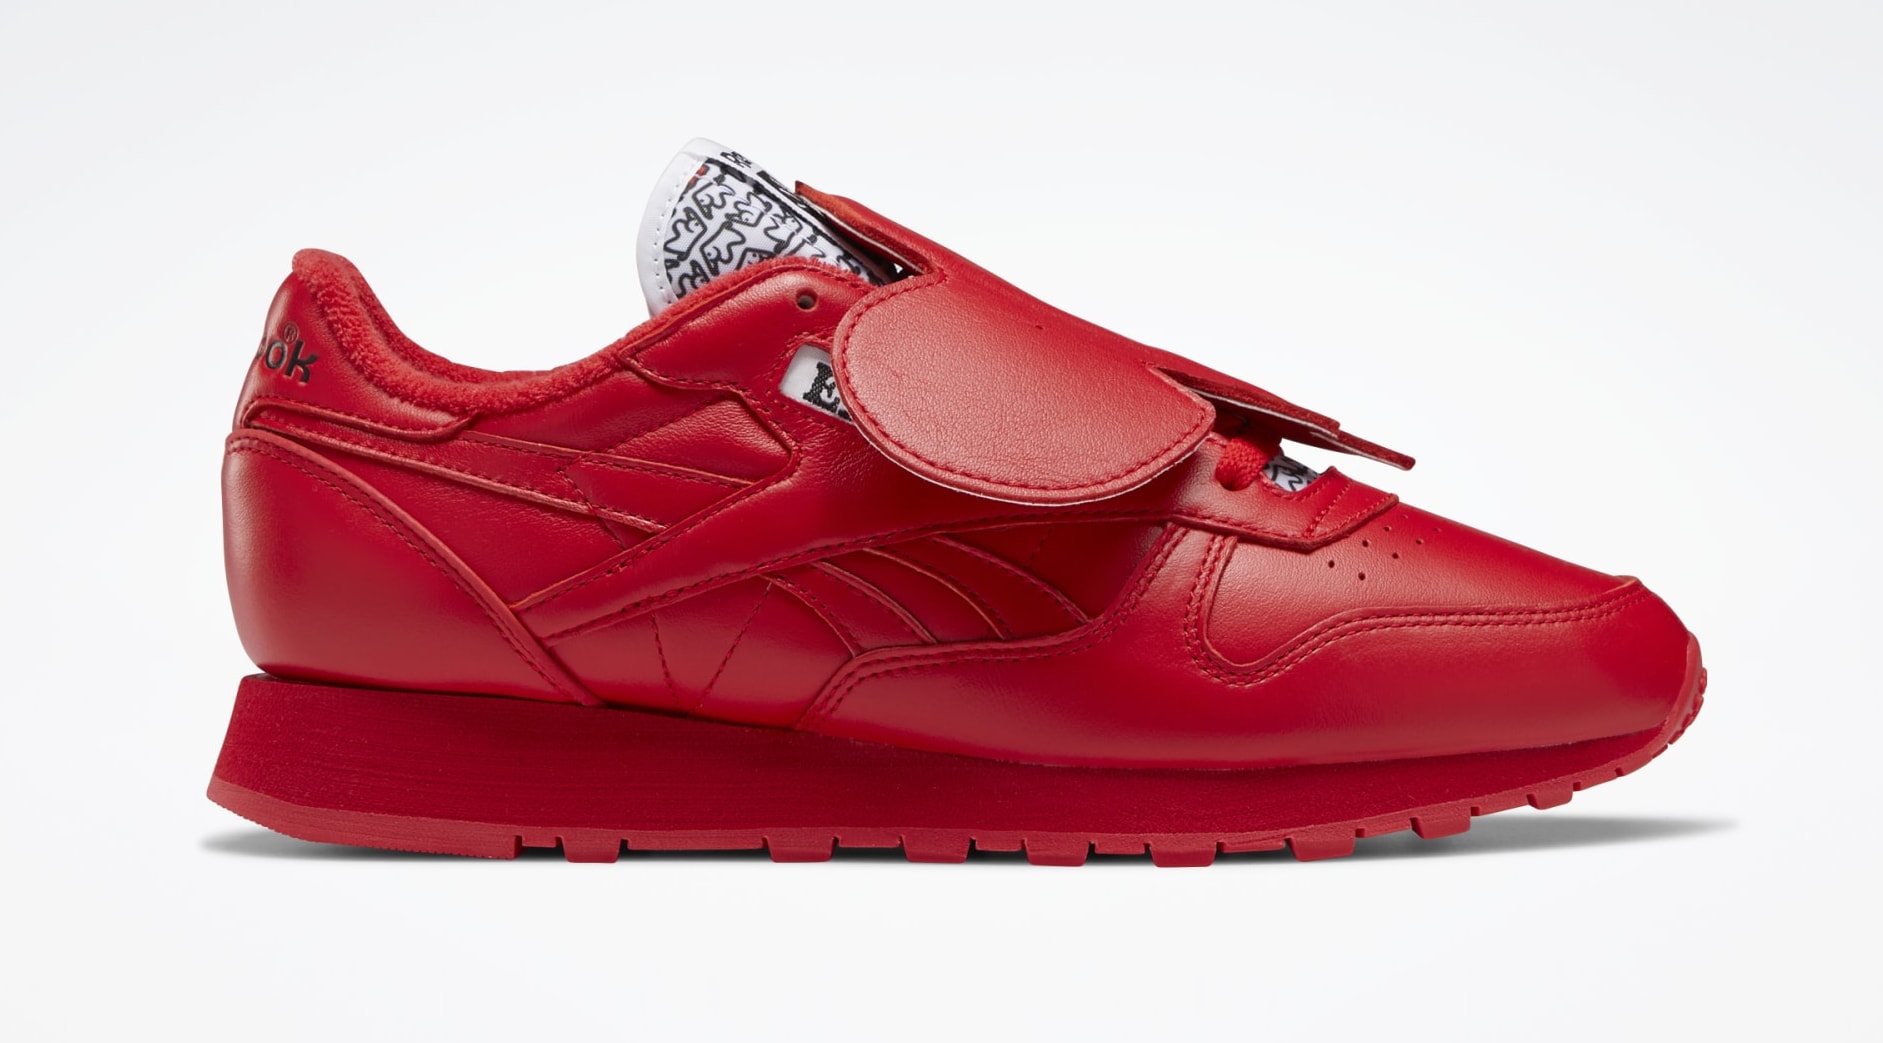 Eames x Reebok Classic Leather &#x27;Red Elephant&#x27; GY6384 Lateral